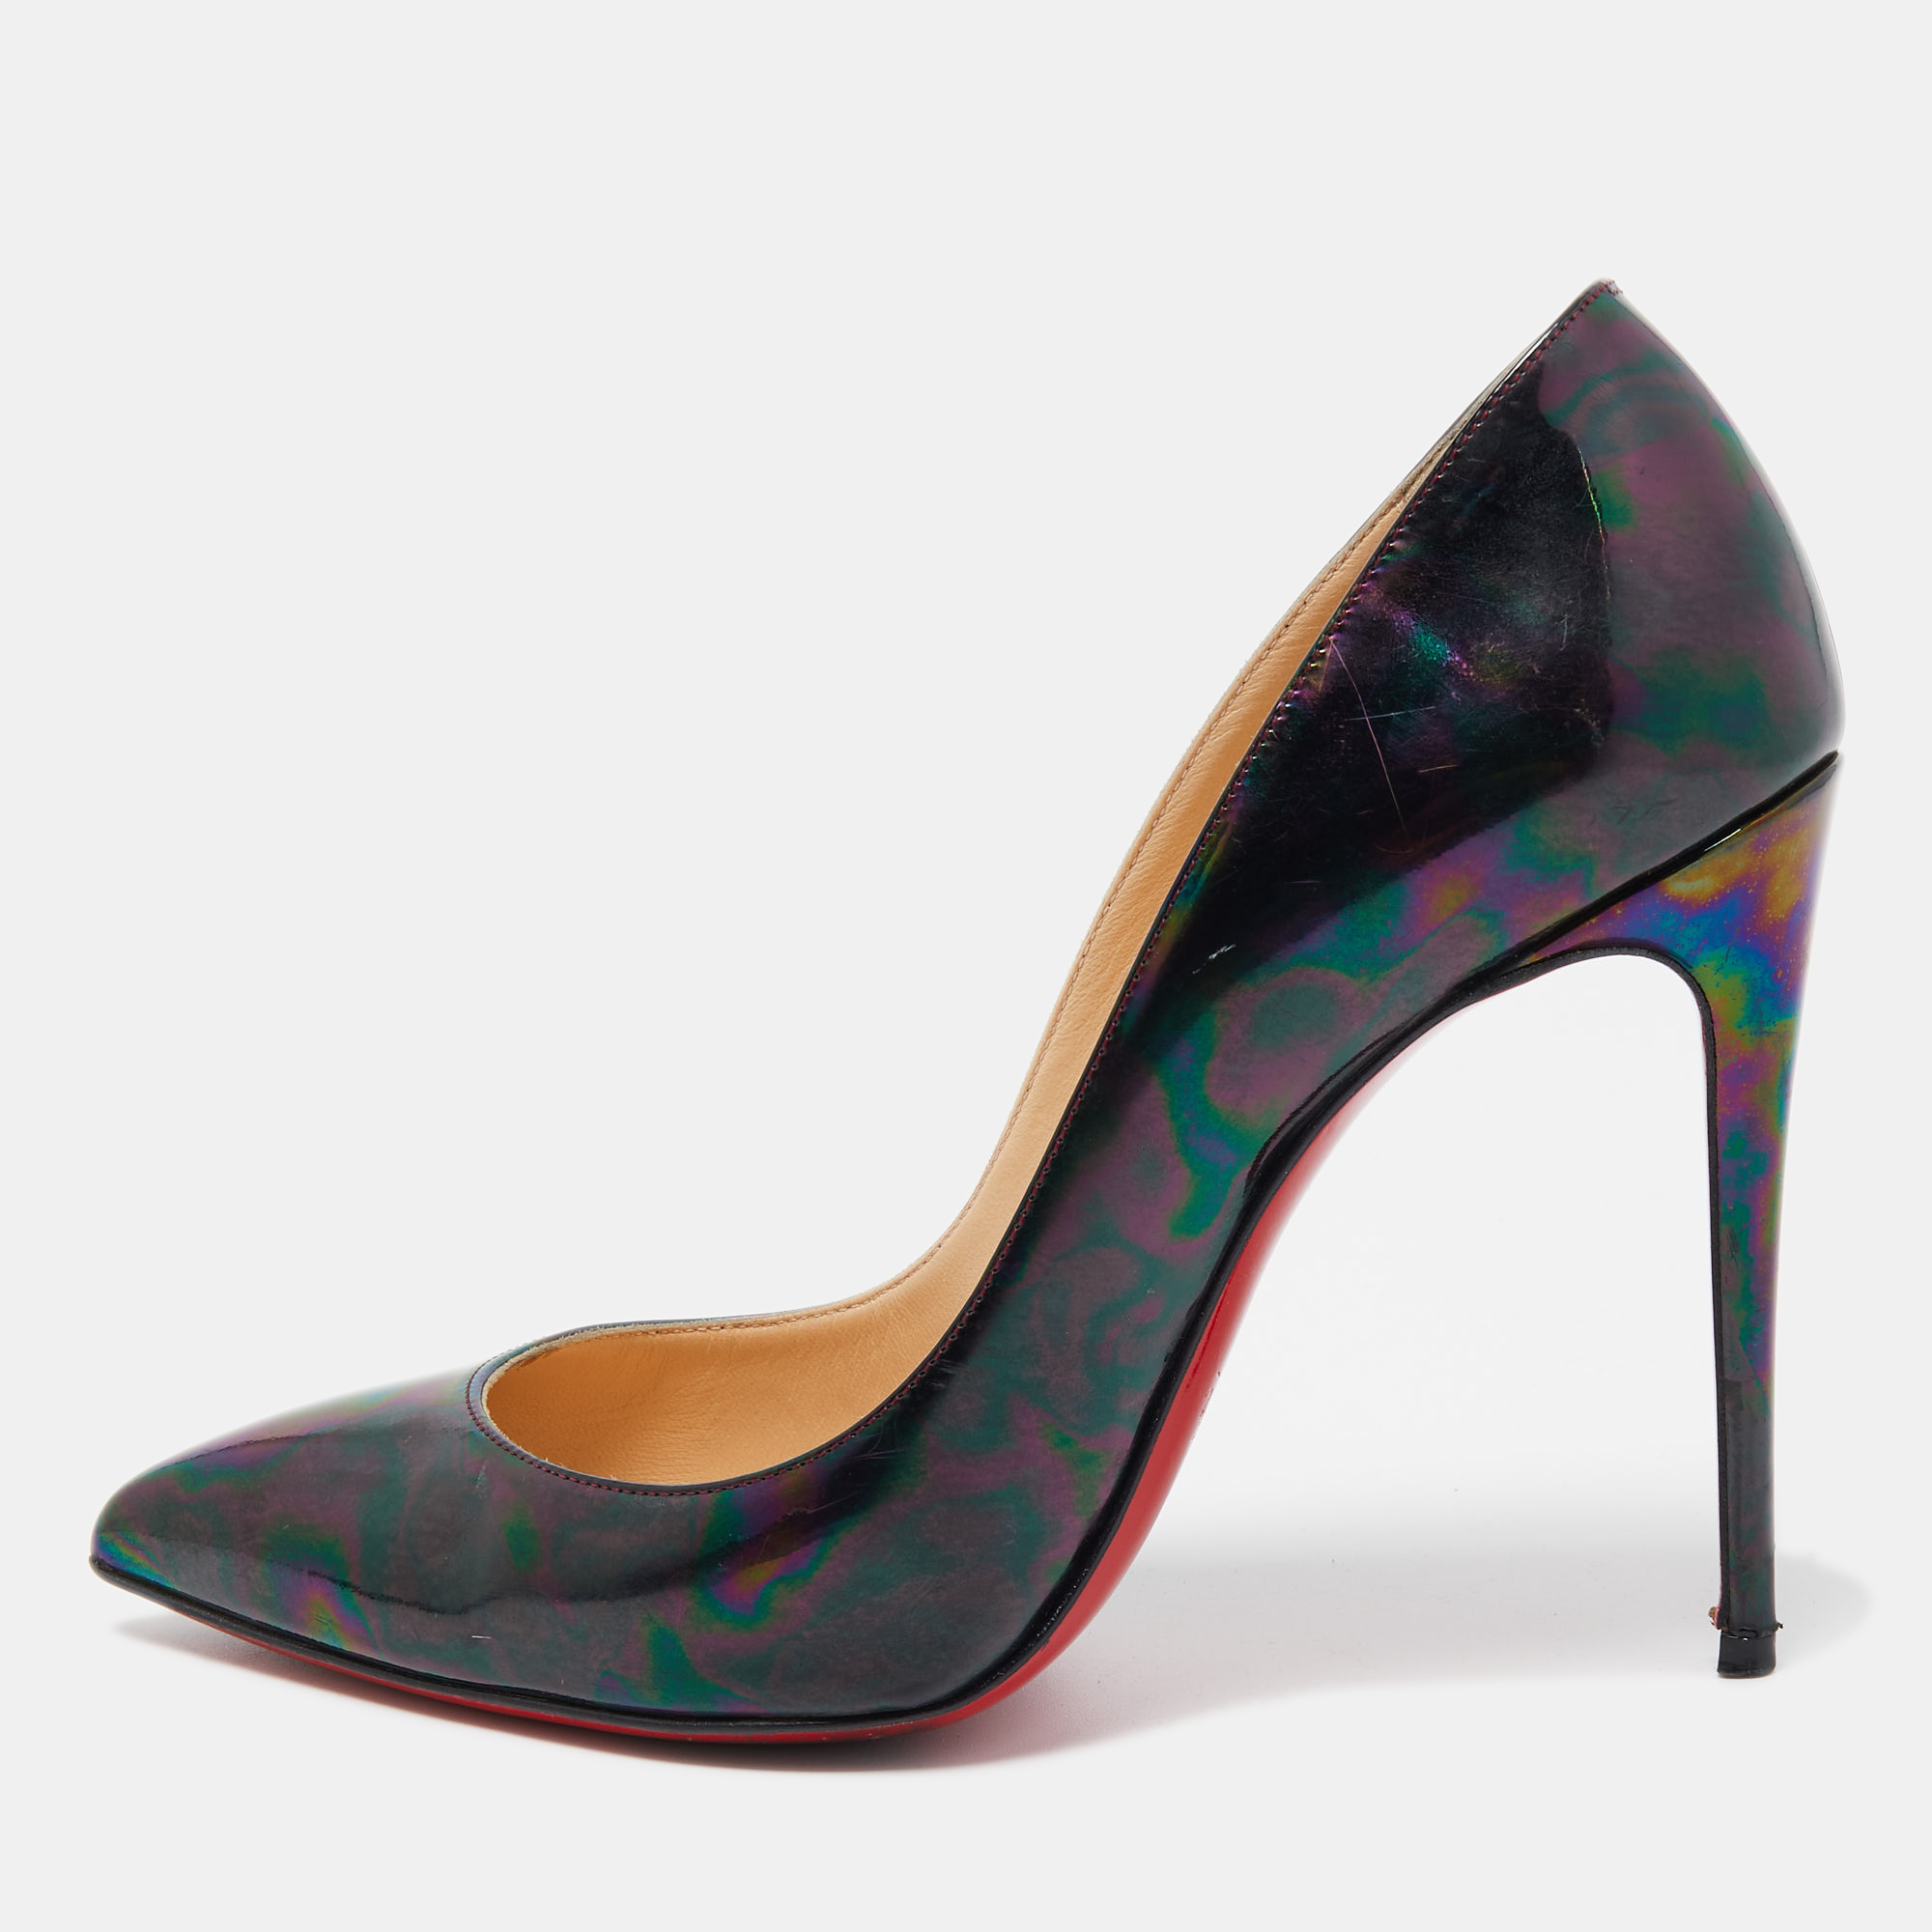 Pre-owned Christian Louboutin Multicolor Iridescent Leather Pigalle Follies Pumps Size 37.5